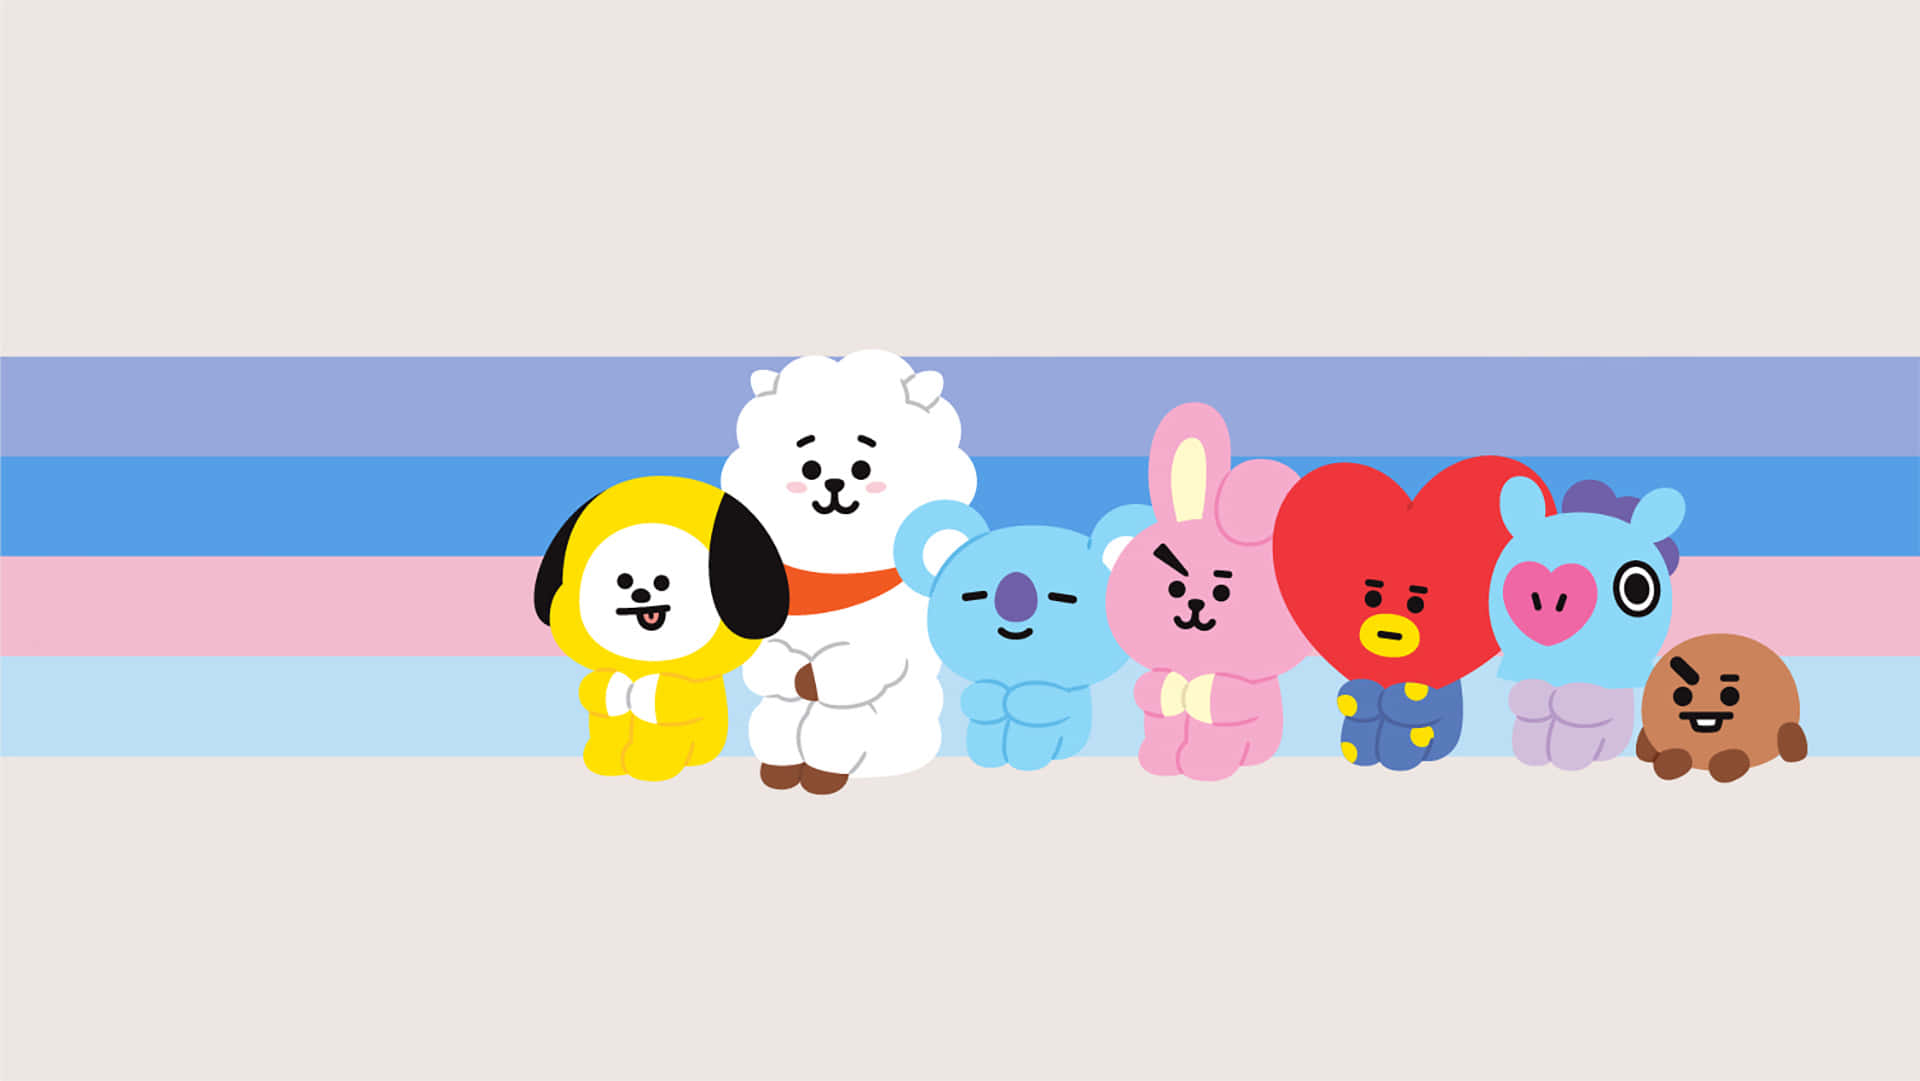 BT21 Characters unite for a colorful and fun-filled adventure on this HD background!